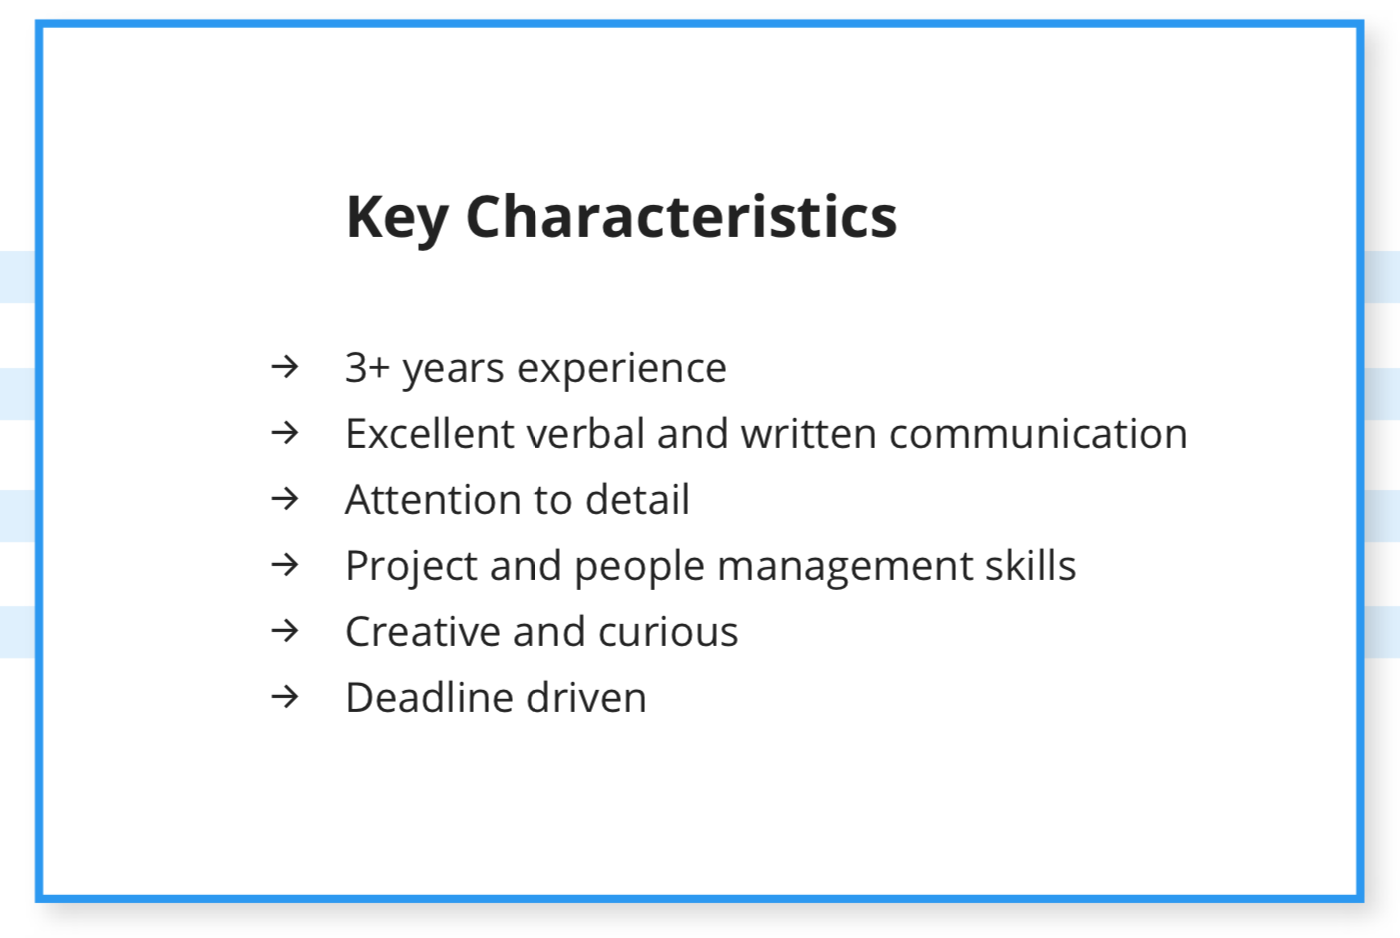 key characteristics of a content strategist: excellent communication, attention to detail, management skills, creative and curious, deadline driven